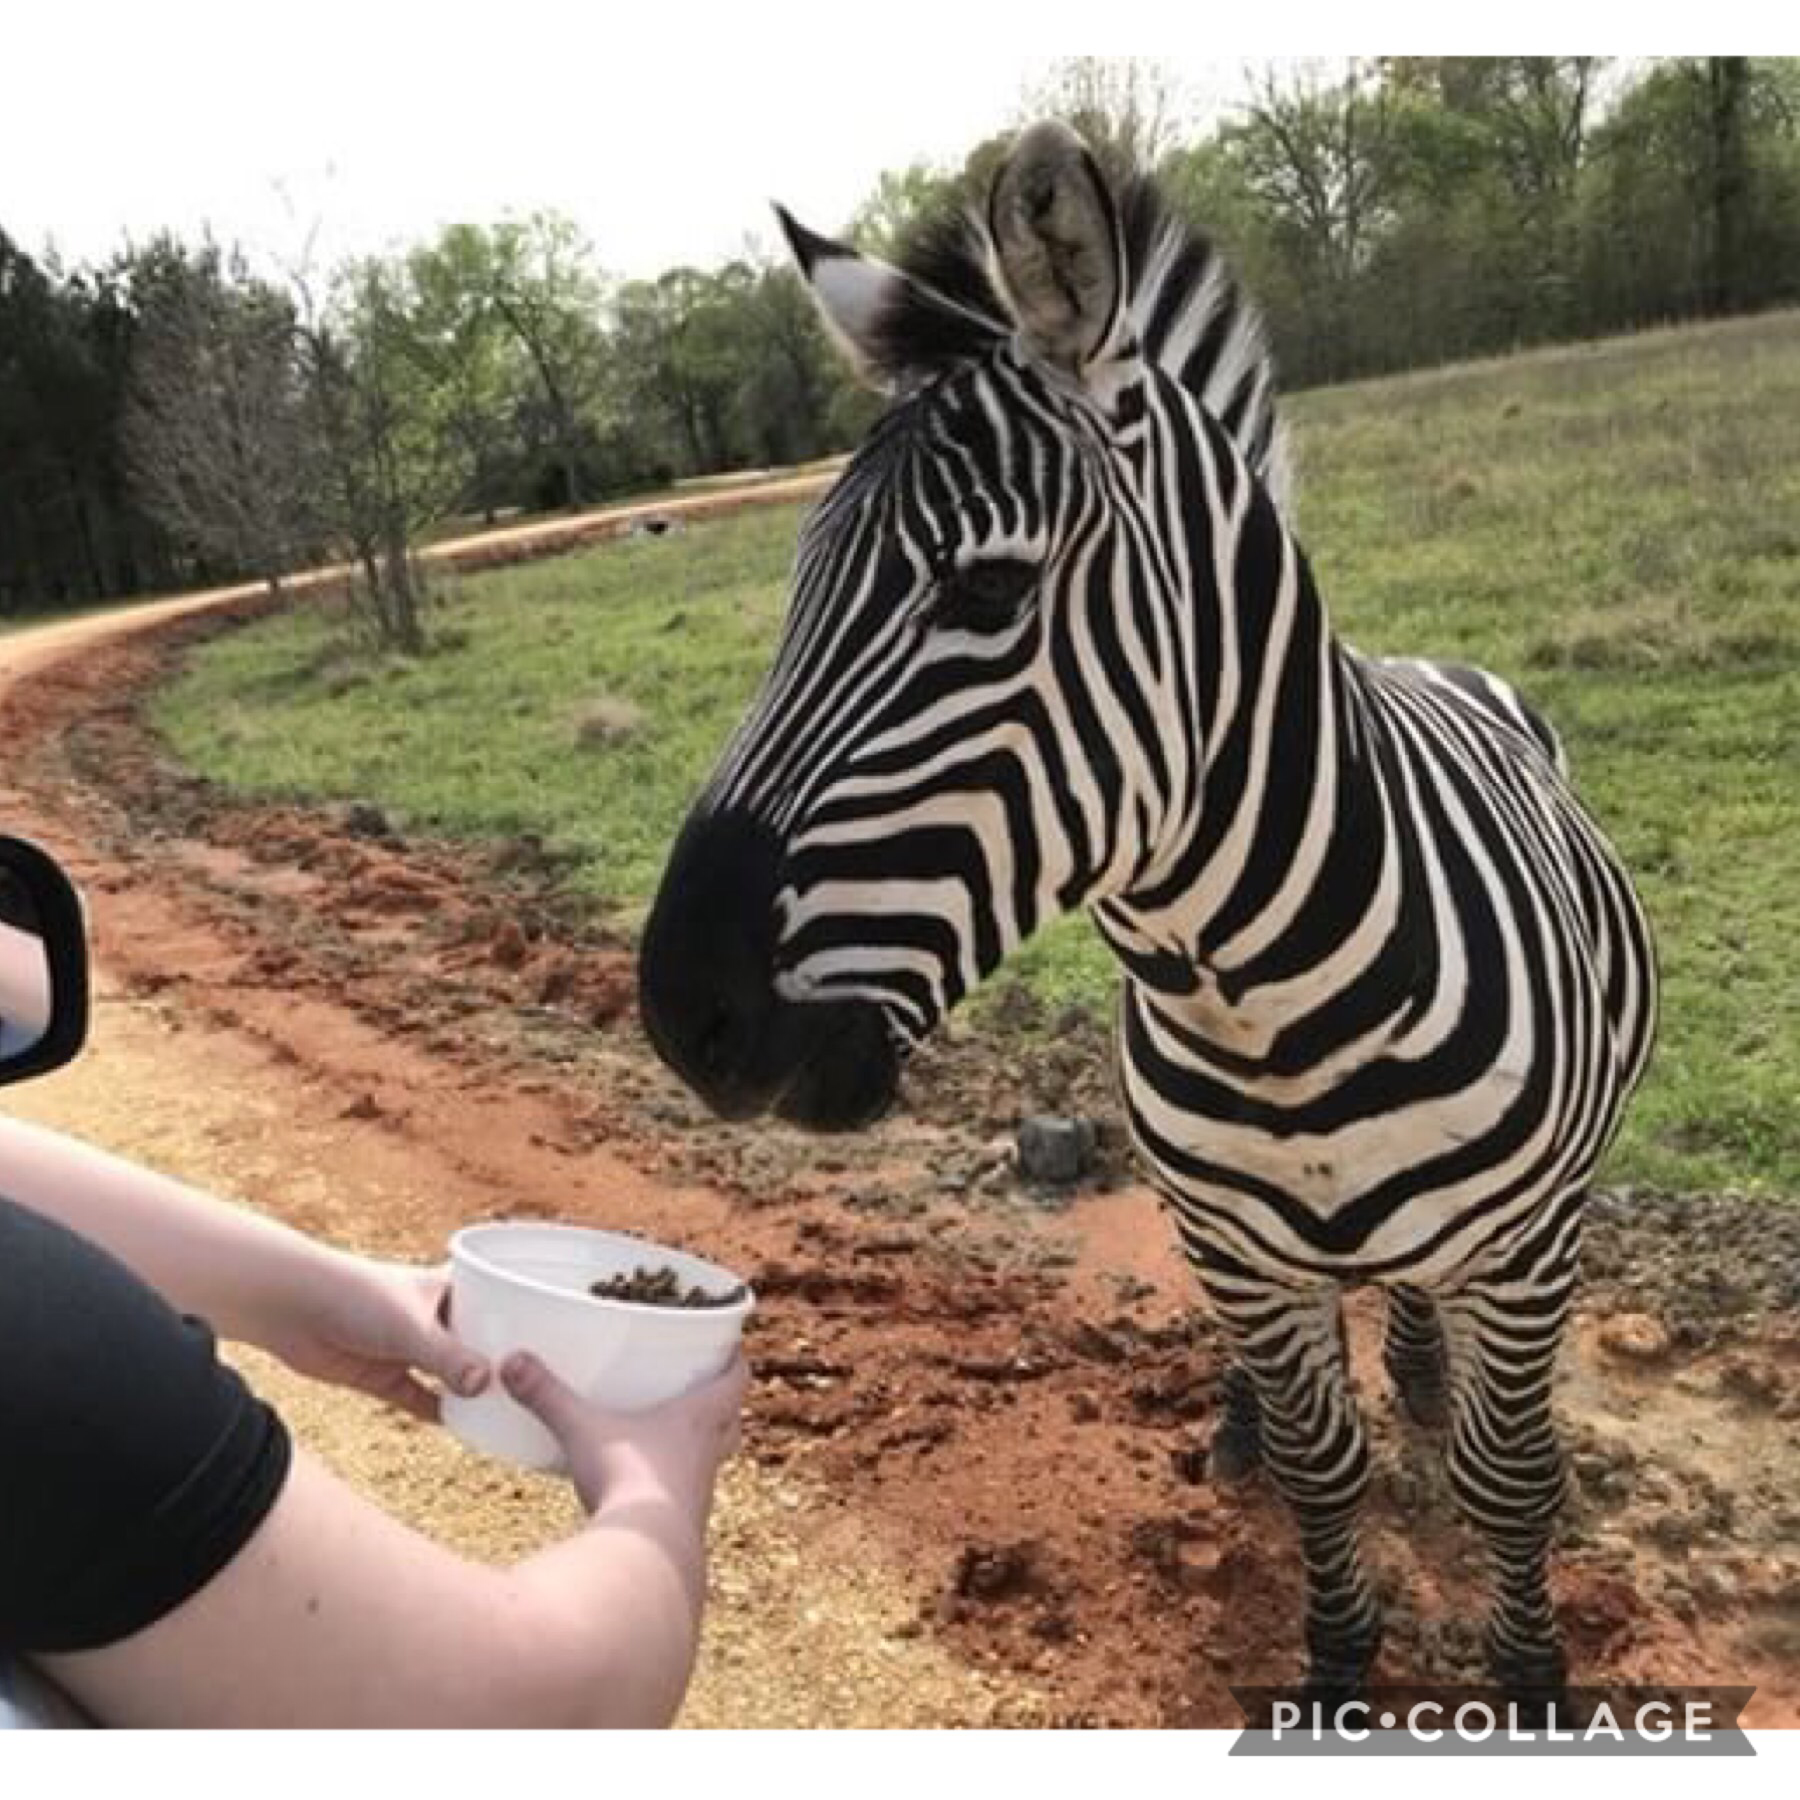 I made a friend last night she sent me pics of this zebra his name is chad and I love him 